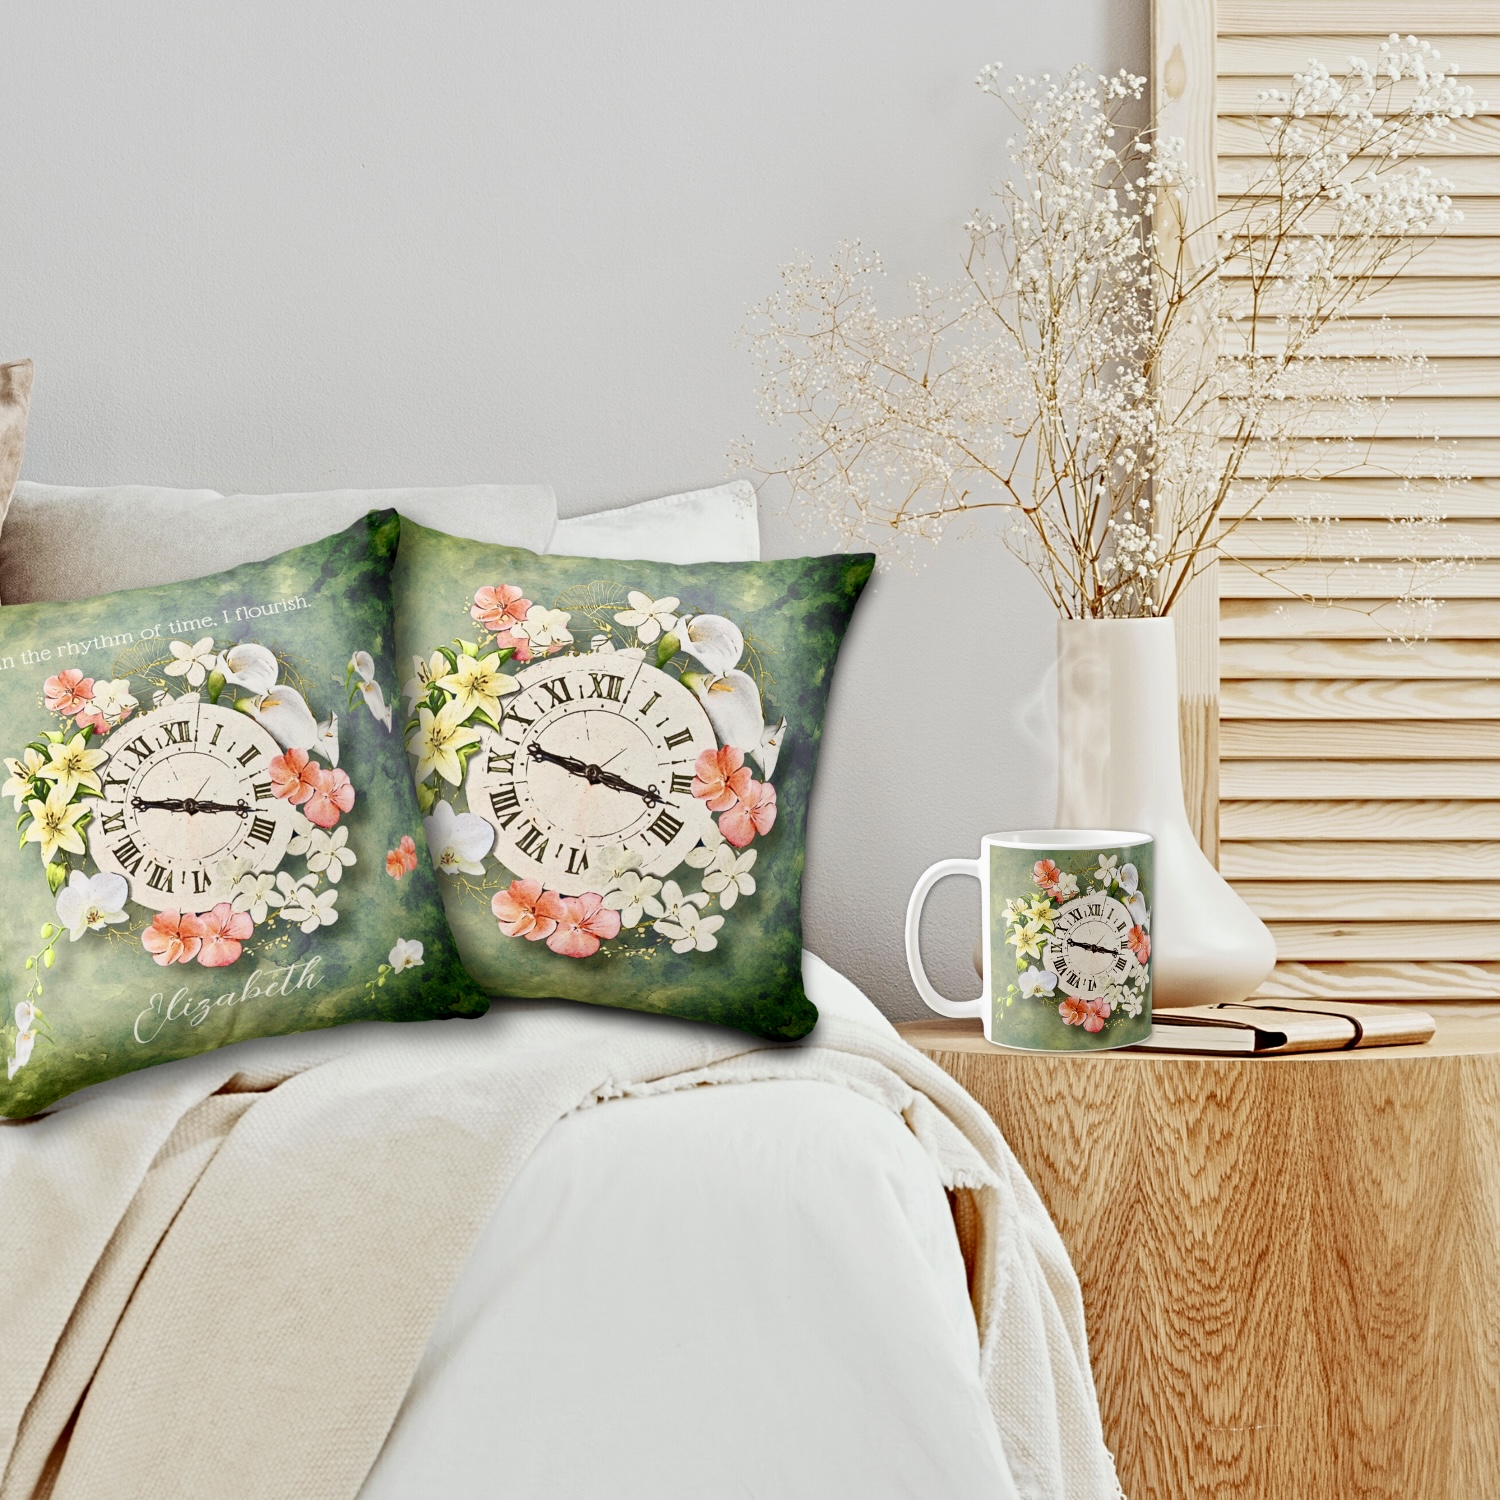 Flowers and Time Throw Pillow and Mug displayed in a fresh boho decor, adding a vibrant and eclectic touch to the space.